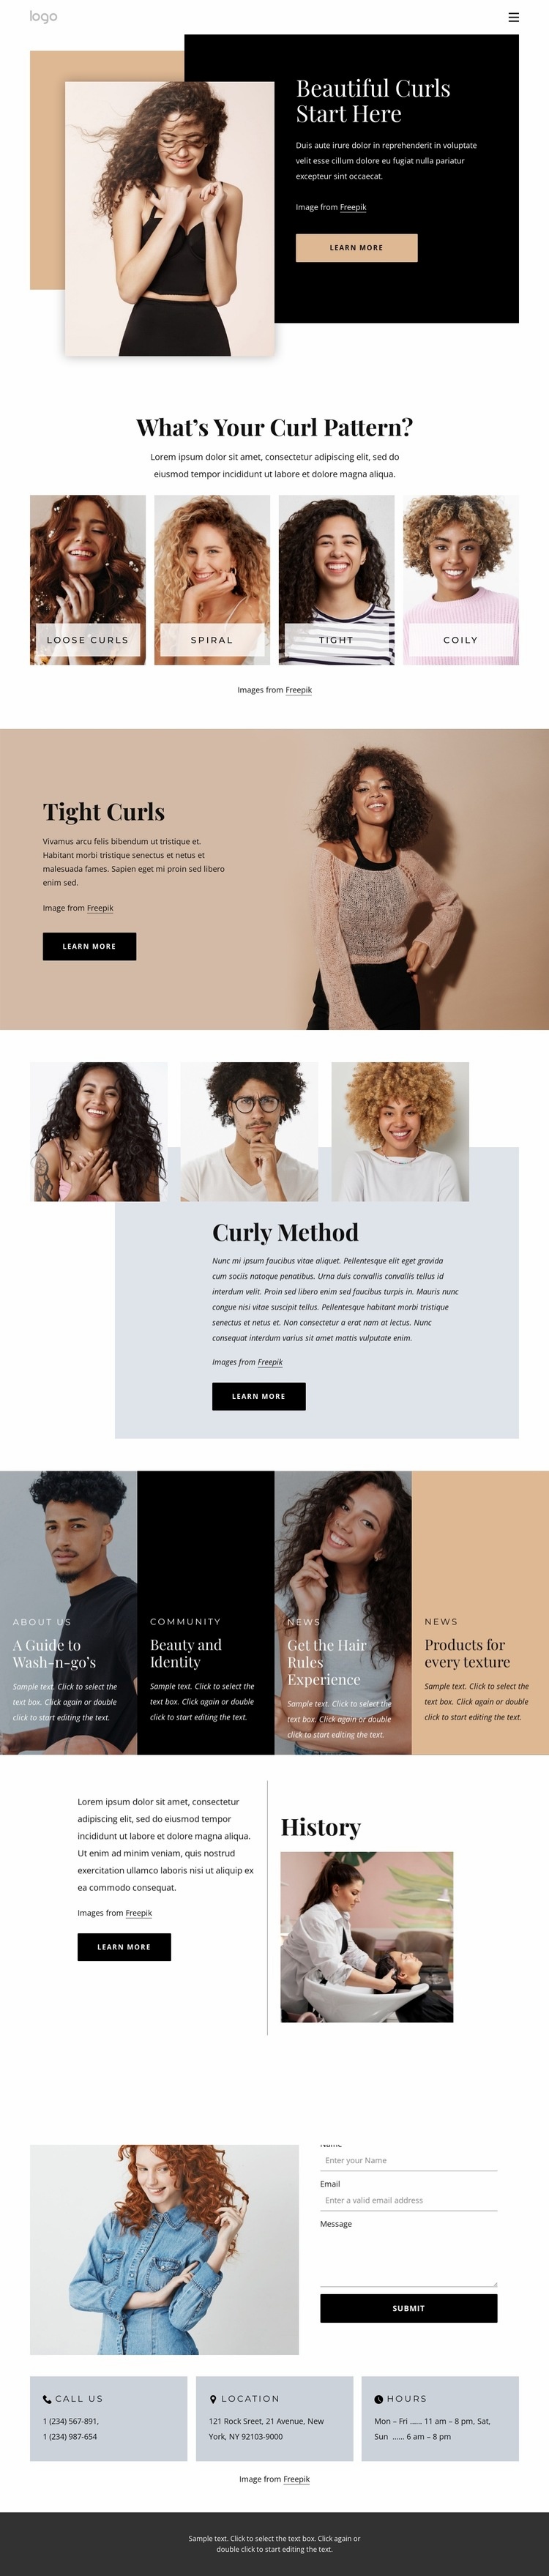 Bring out the best in your curls Webflow Template Alternative